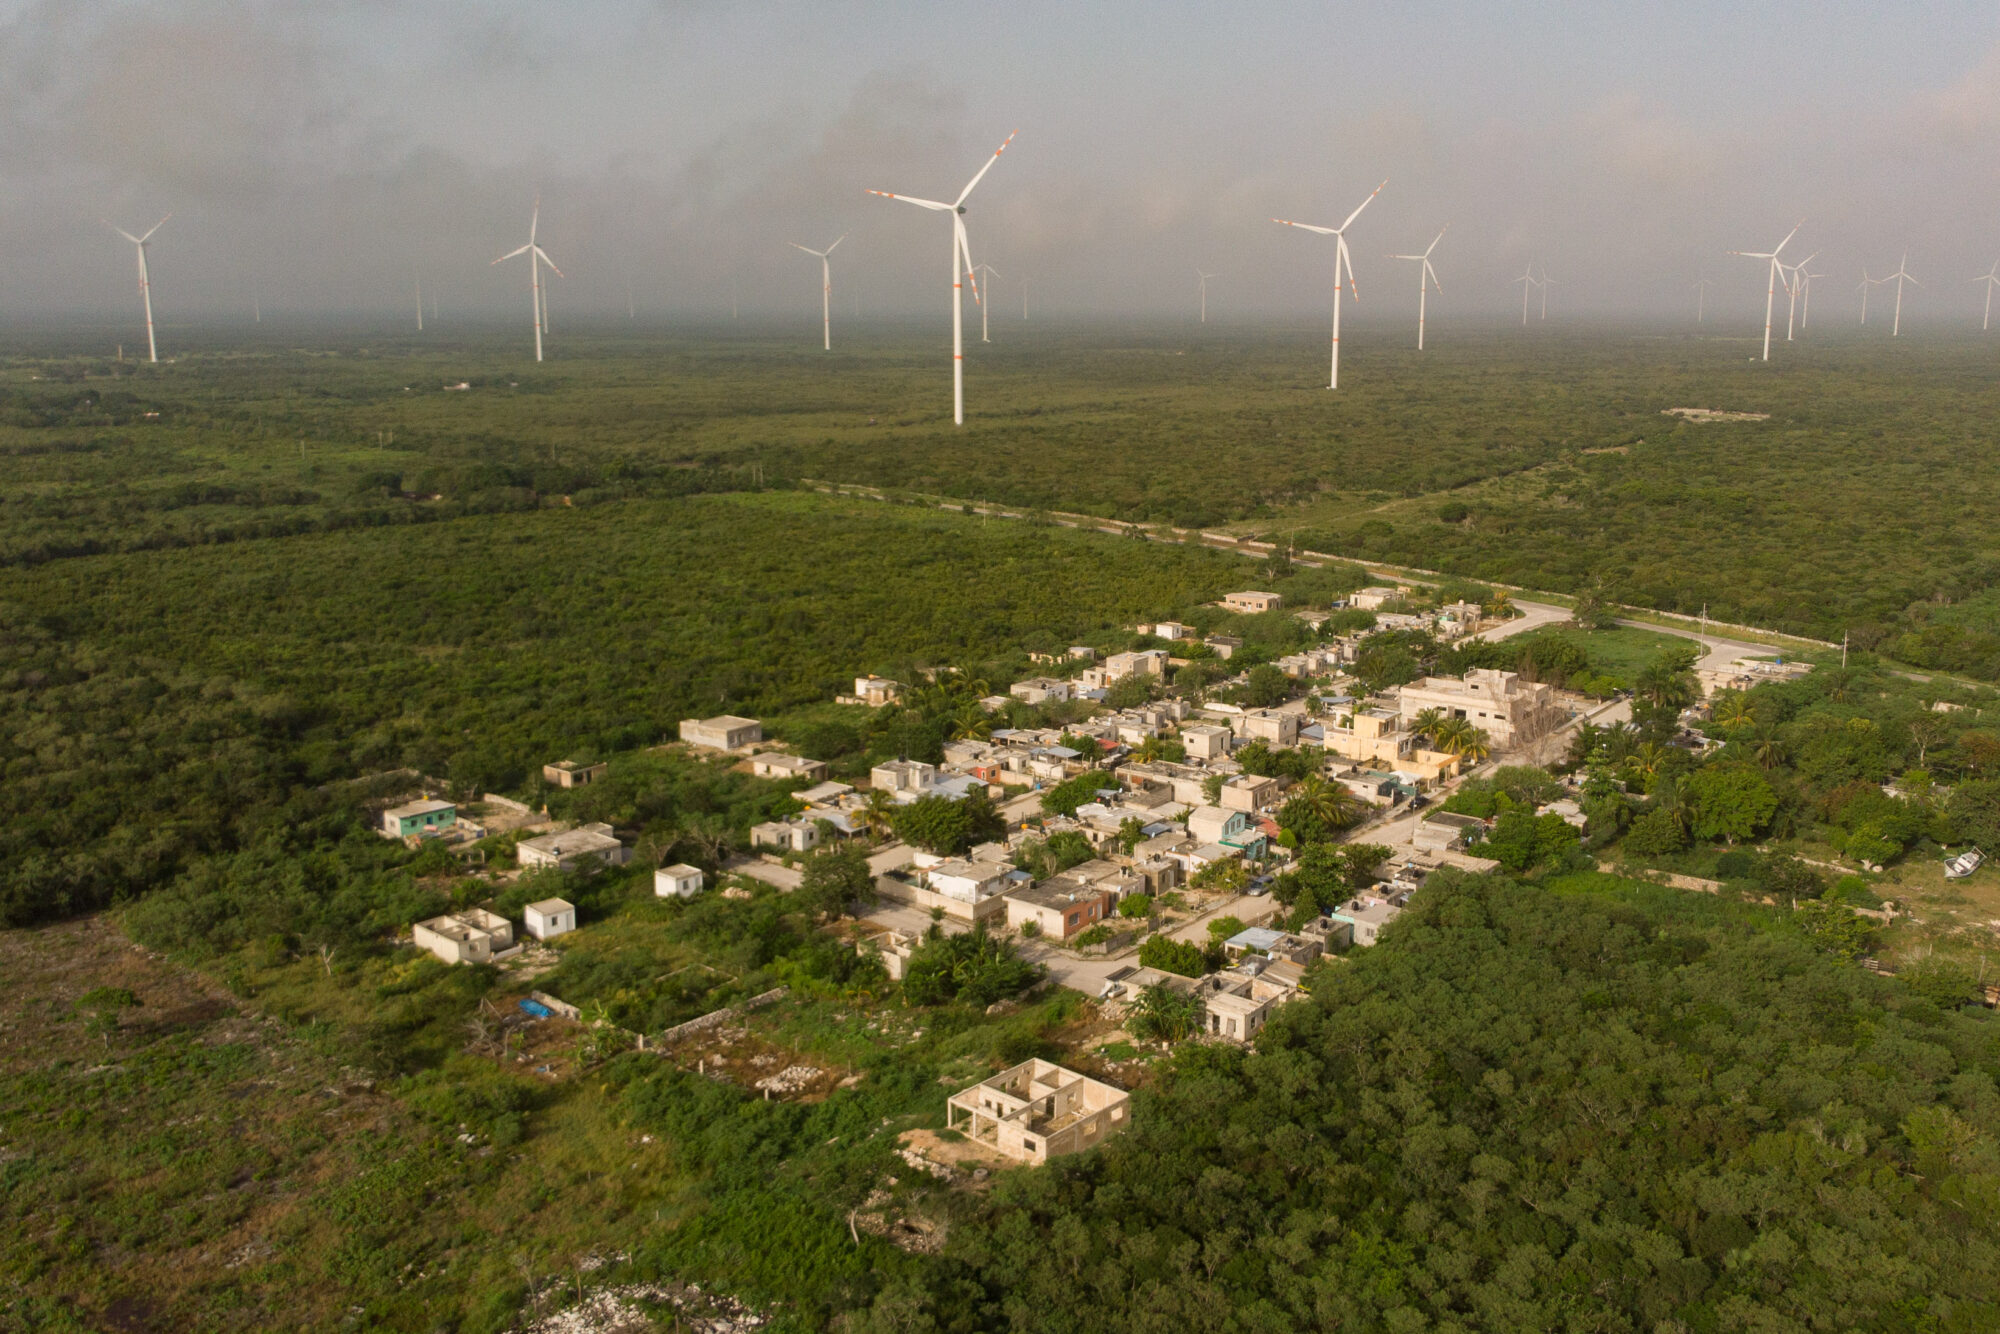 <p>Residents in the Flamingos settlement say the Dzilam de Brazo wind farm does not benefit their community (Image: Cuauhtémoc Moreno)</p>